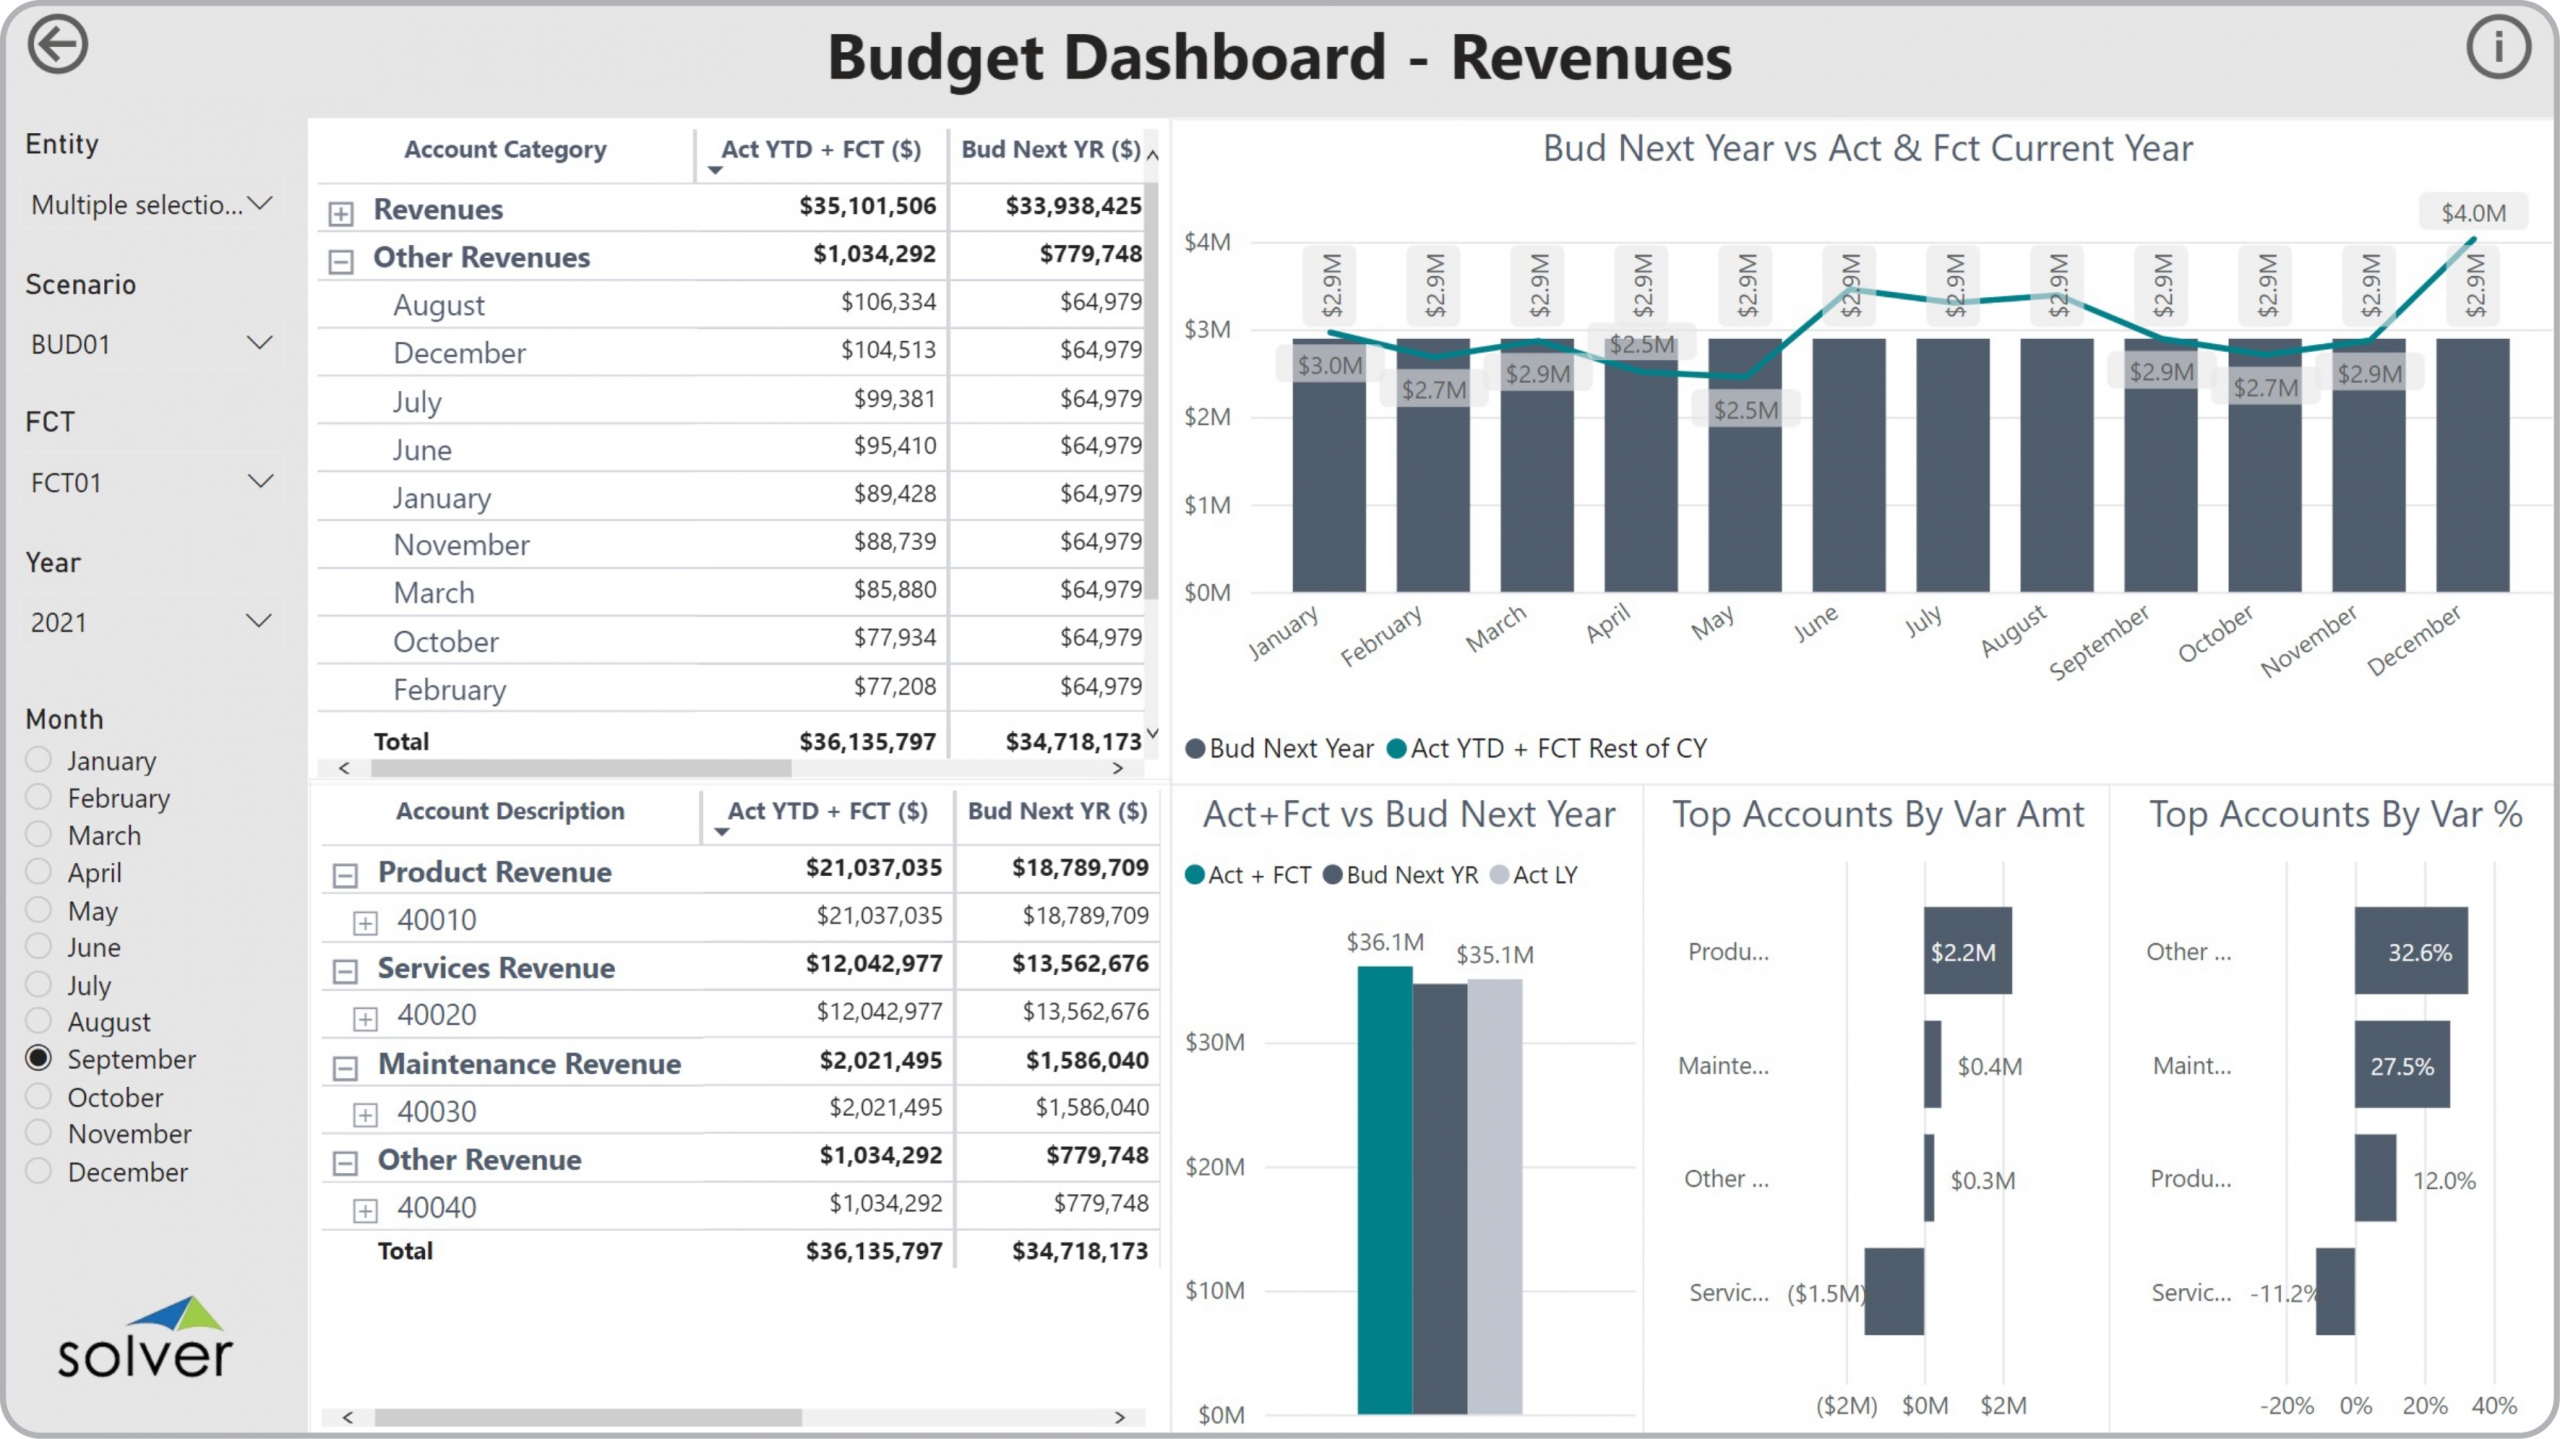 Example of a Revenue Budget Dashboard to Streamline the Planning Process